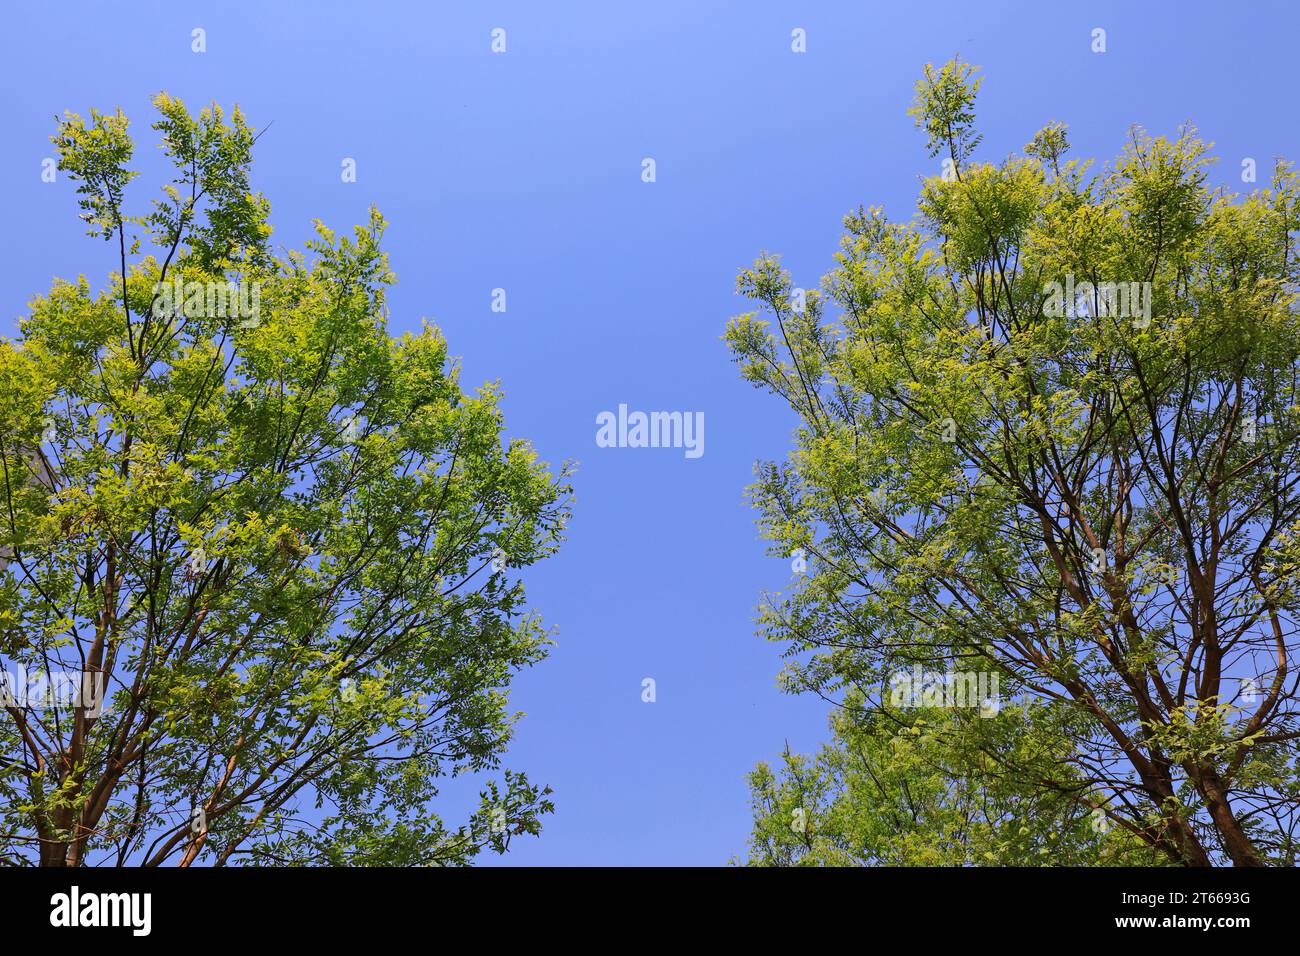 Sophora Tree Branches, Look Up Stock Photo